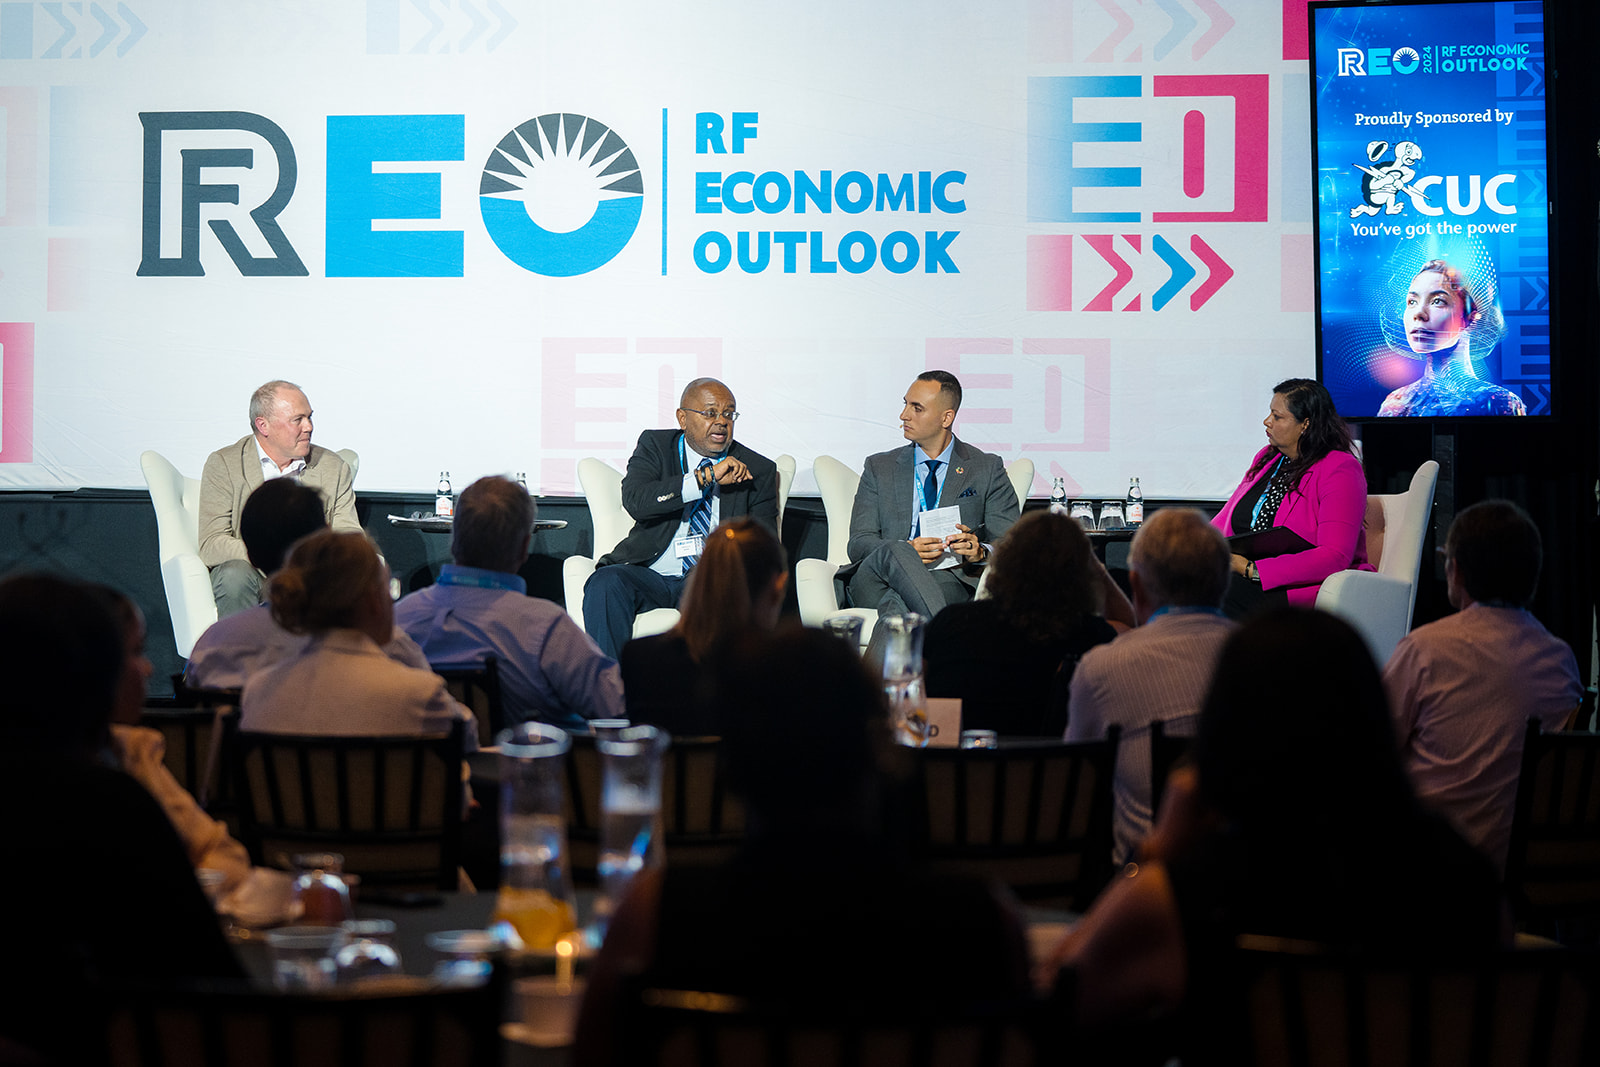 RF Economic Outlook Conference Delivers Insights on Artificial Intelligence and Global Challenges